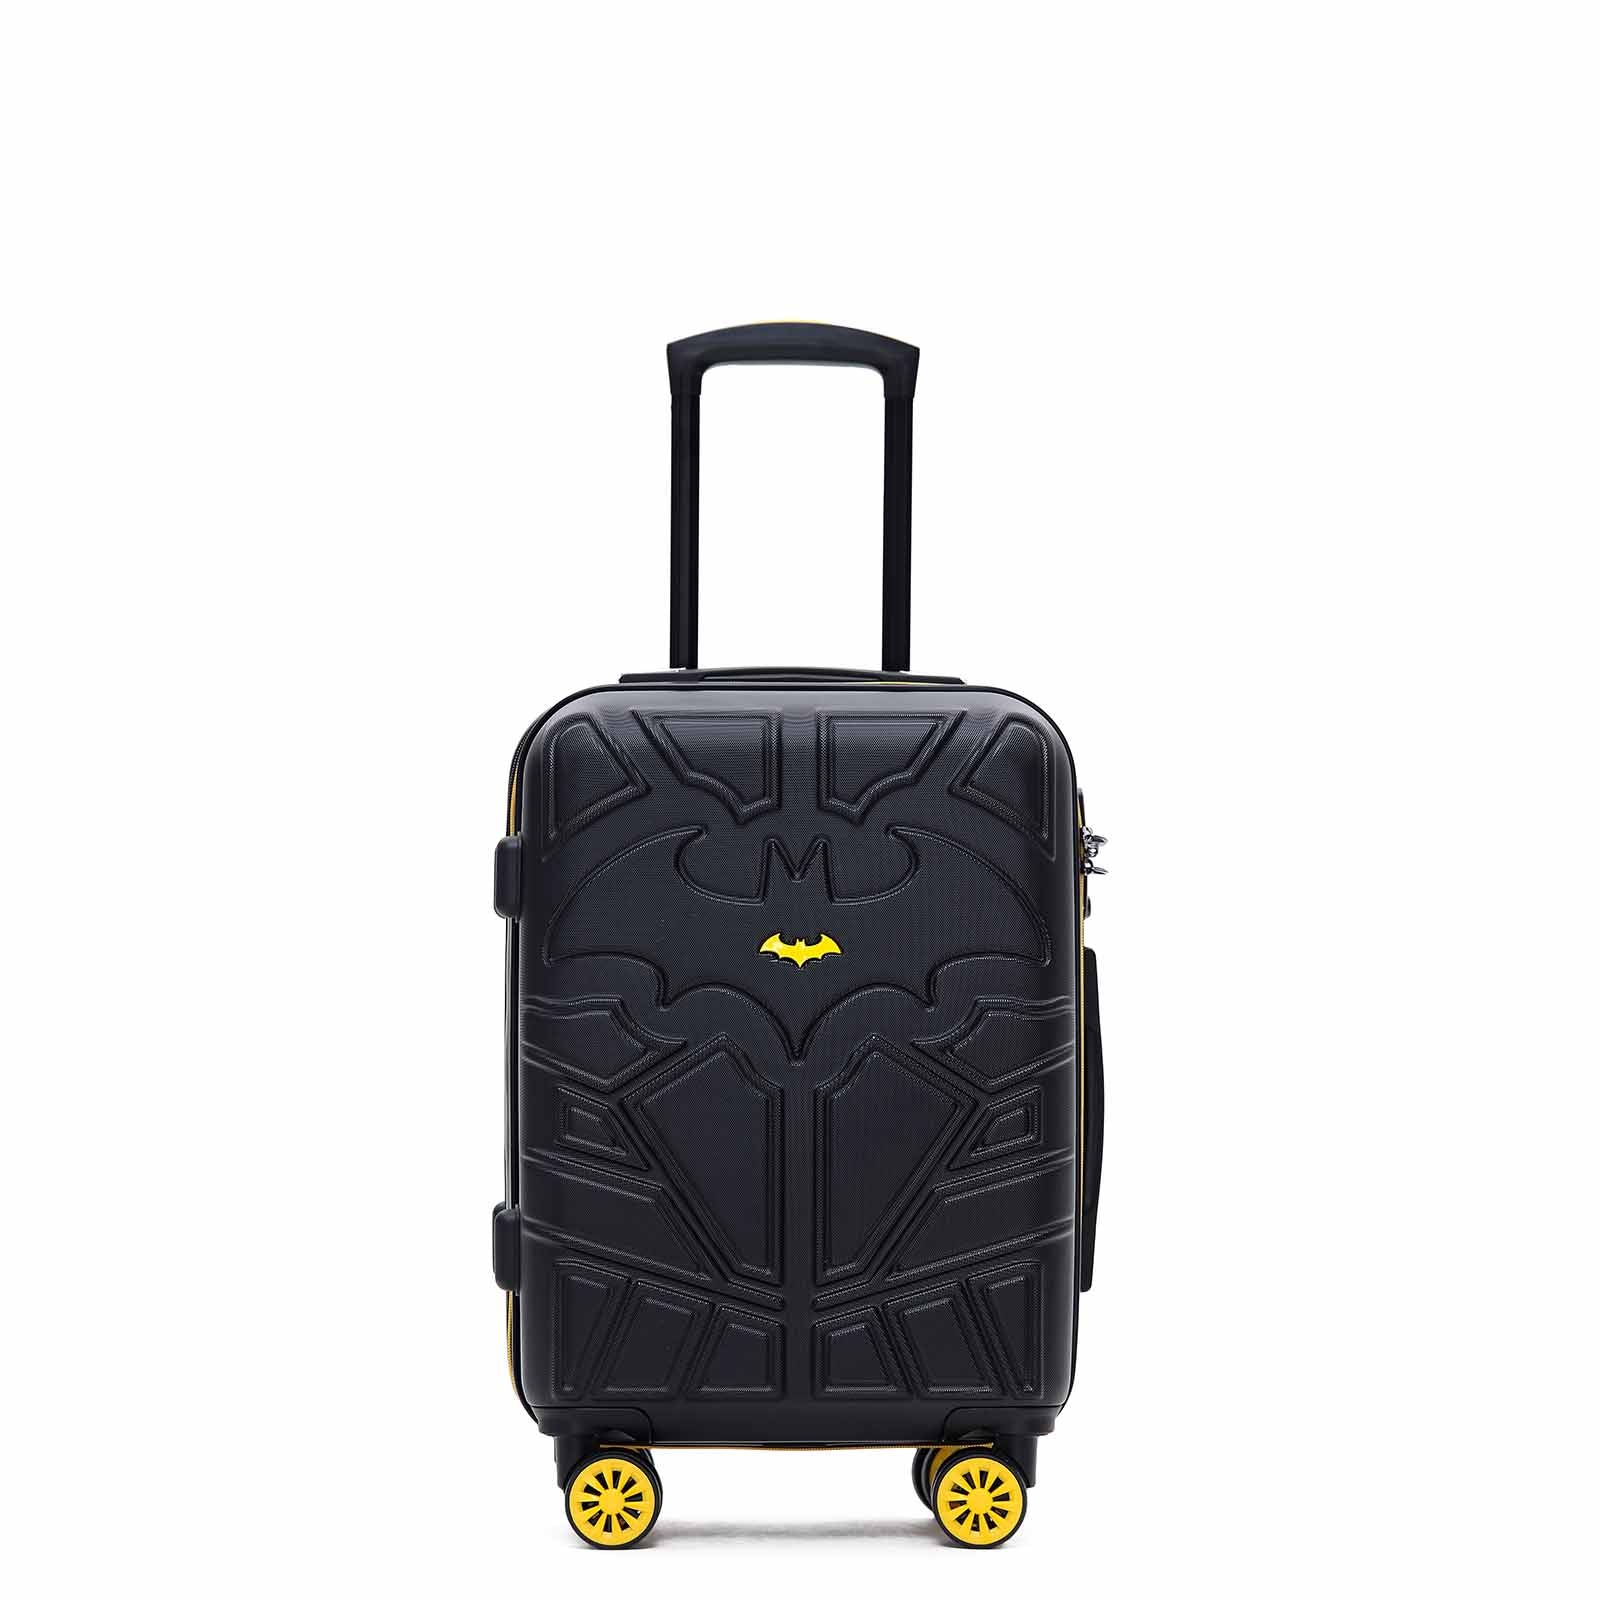 Warner Brothers Batman 19inch Carry-On Suitcase